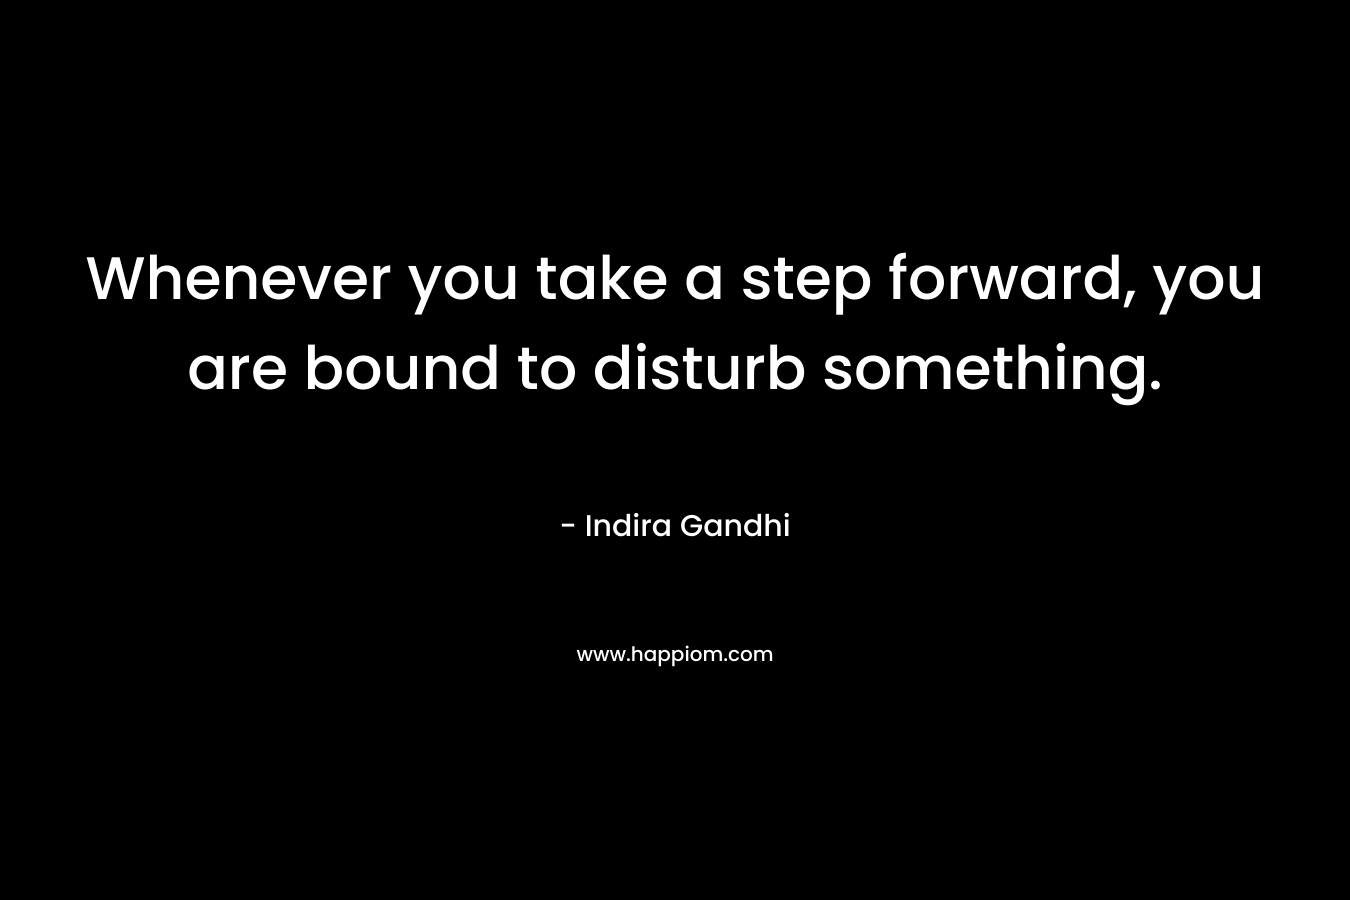 Whenever you take a step forward, you are bound to disturb something.